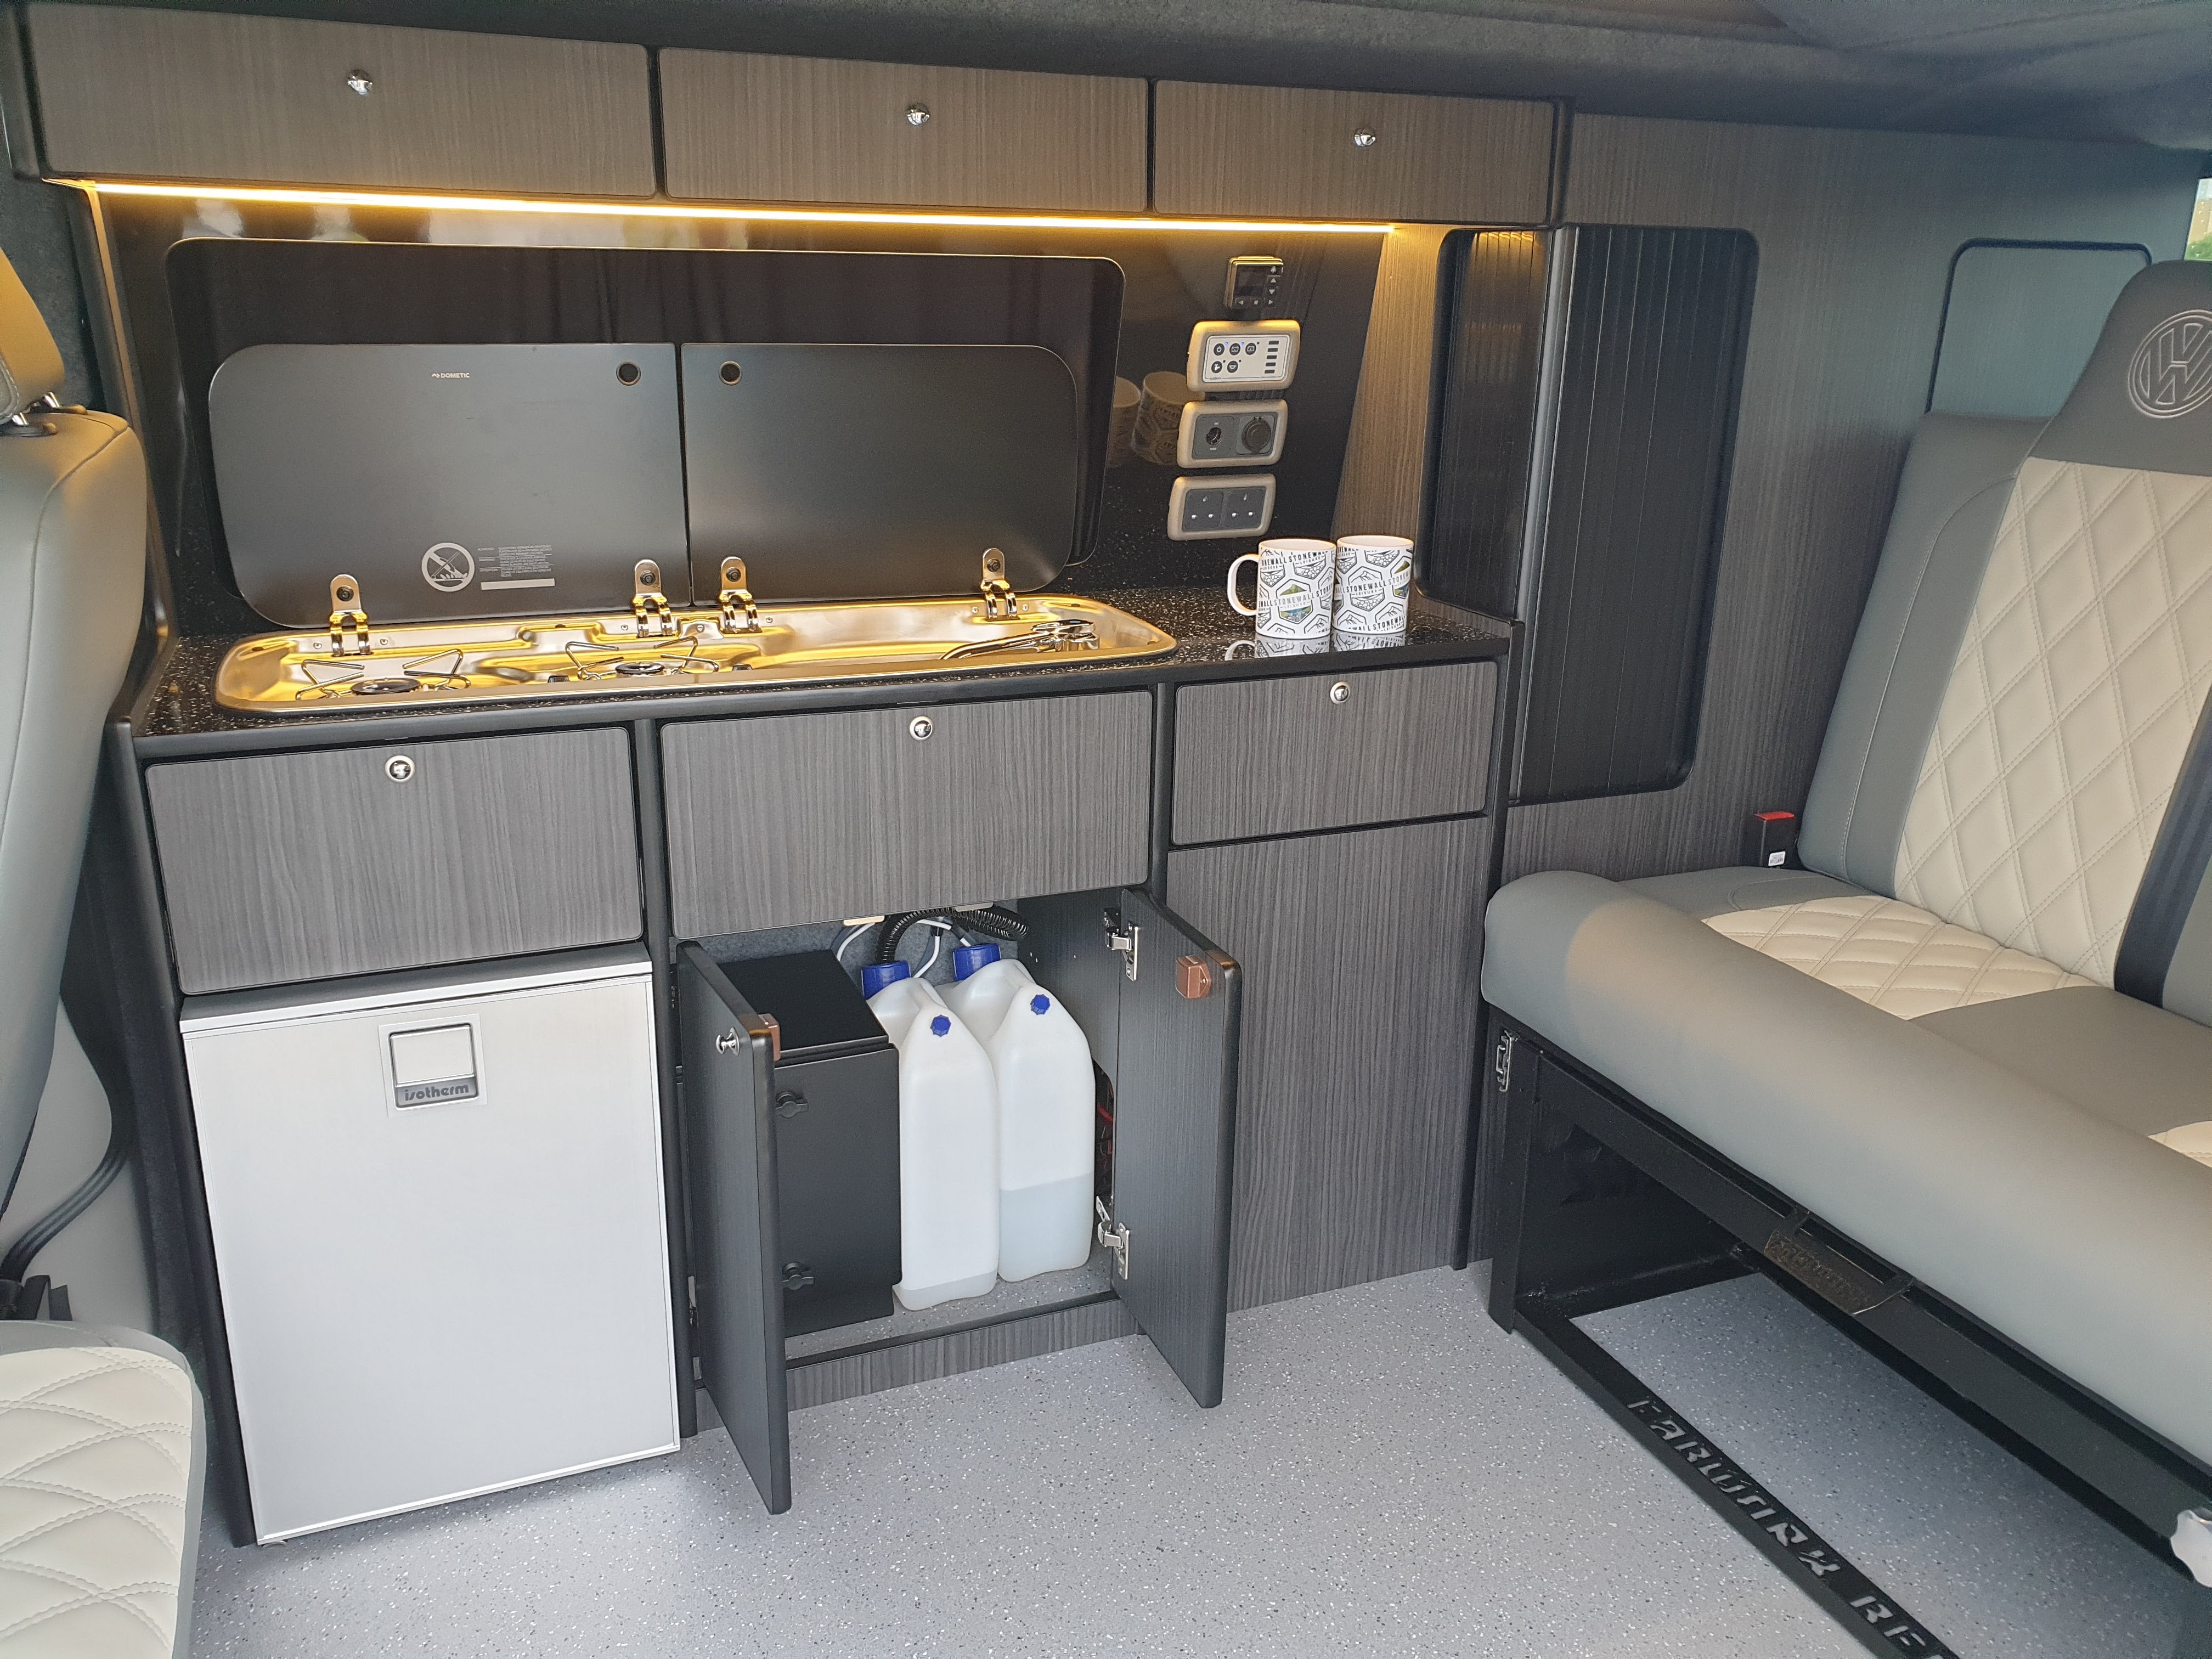 VW Van Conversion with Full Kitchen Installation Including Sink, Hob, Water, Gas Locker and Fridge